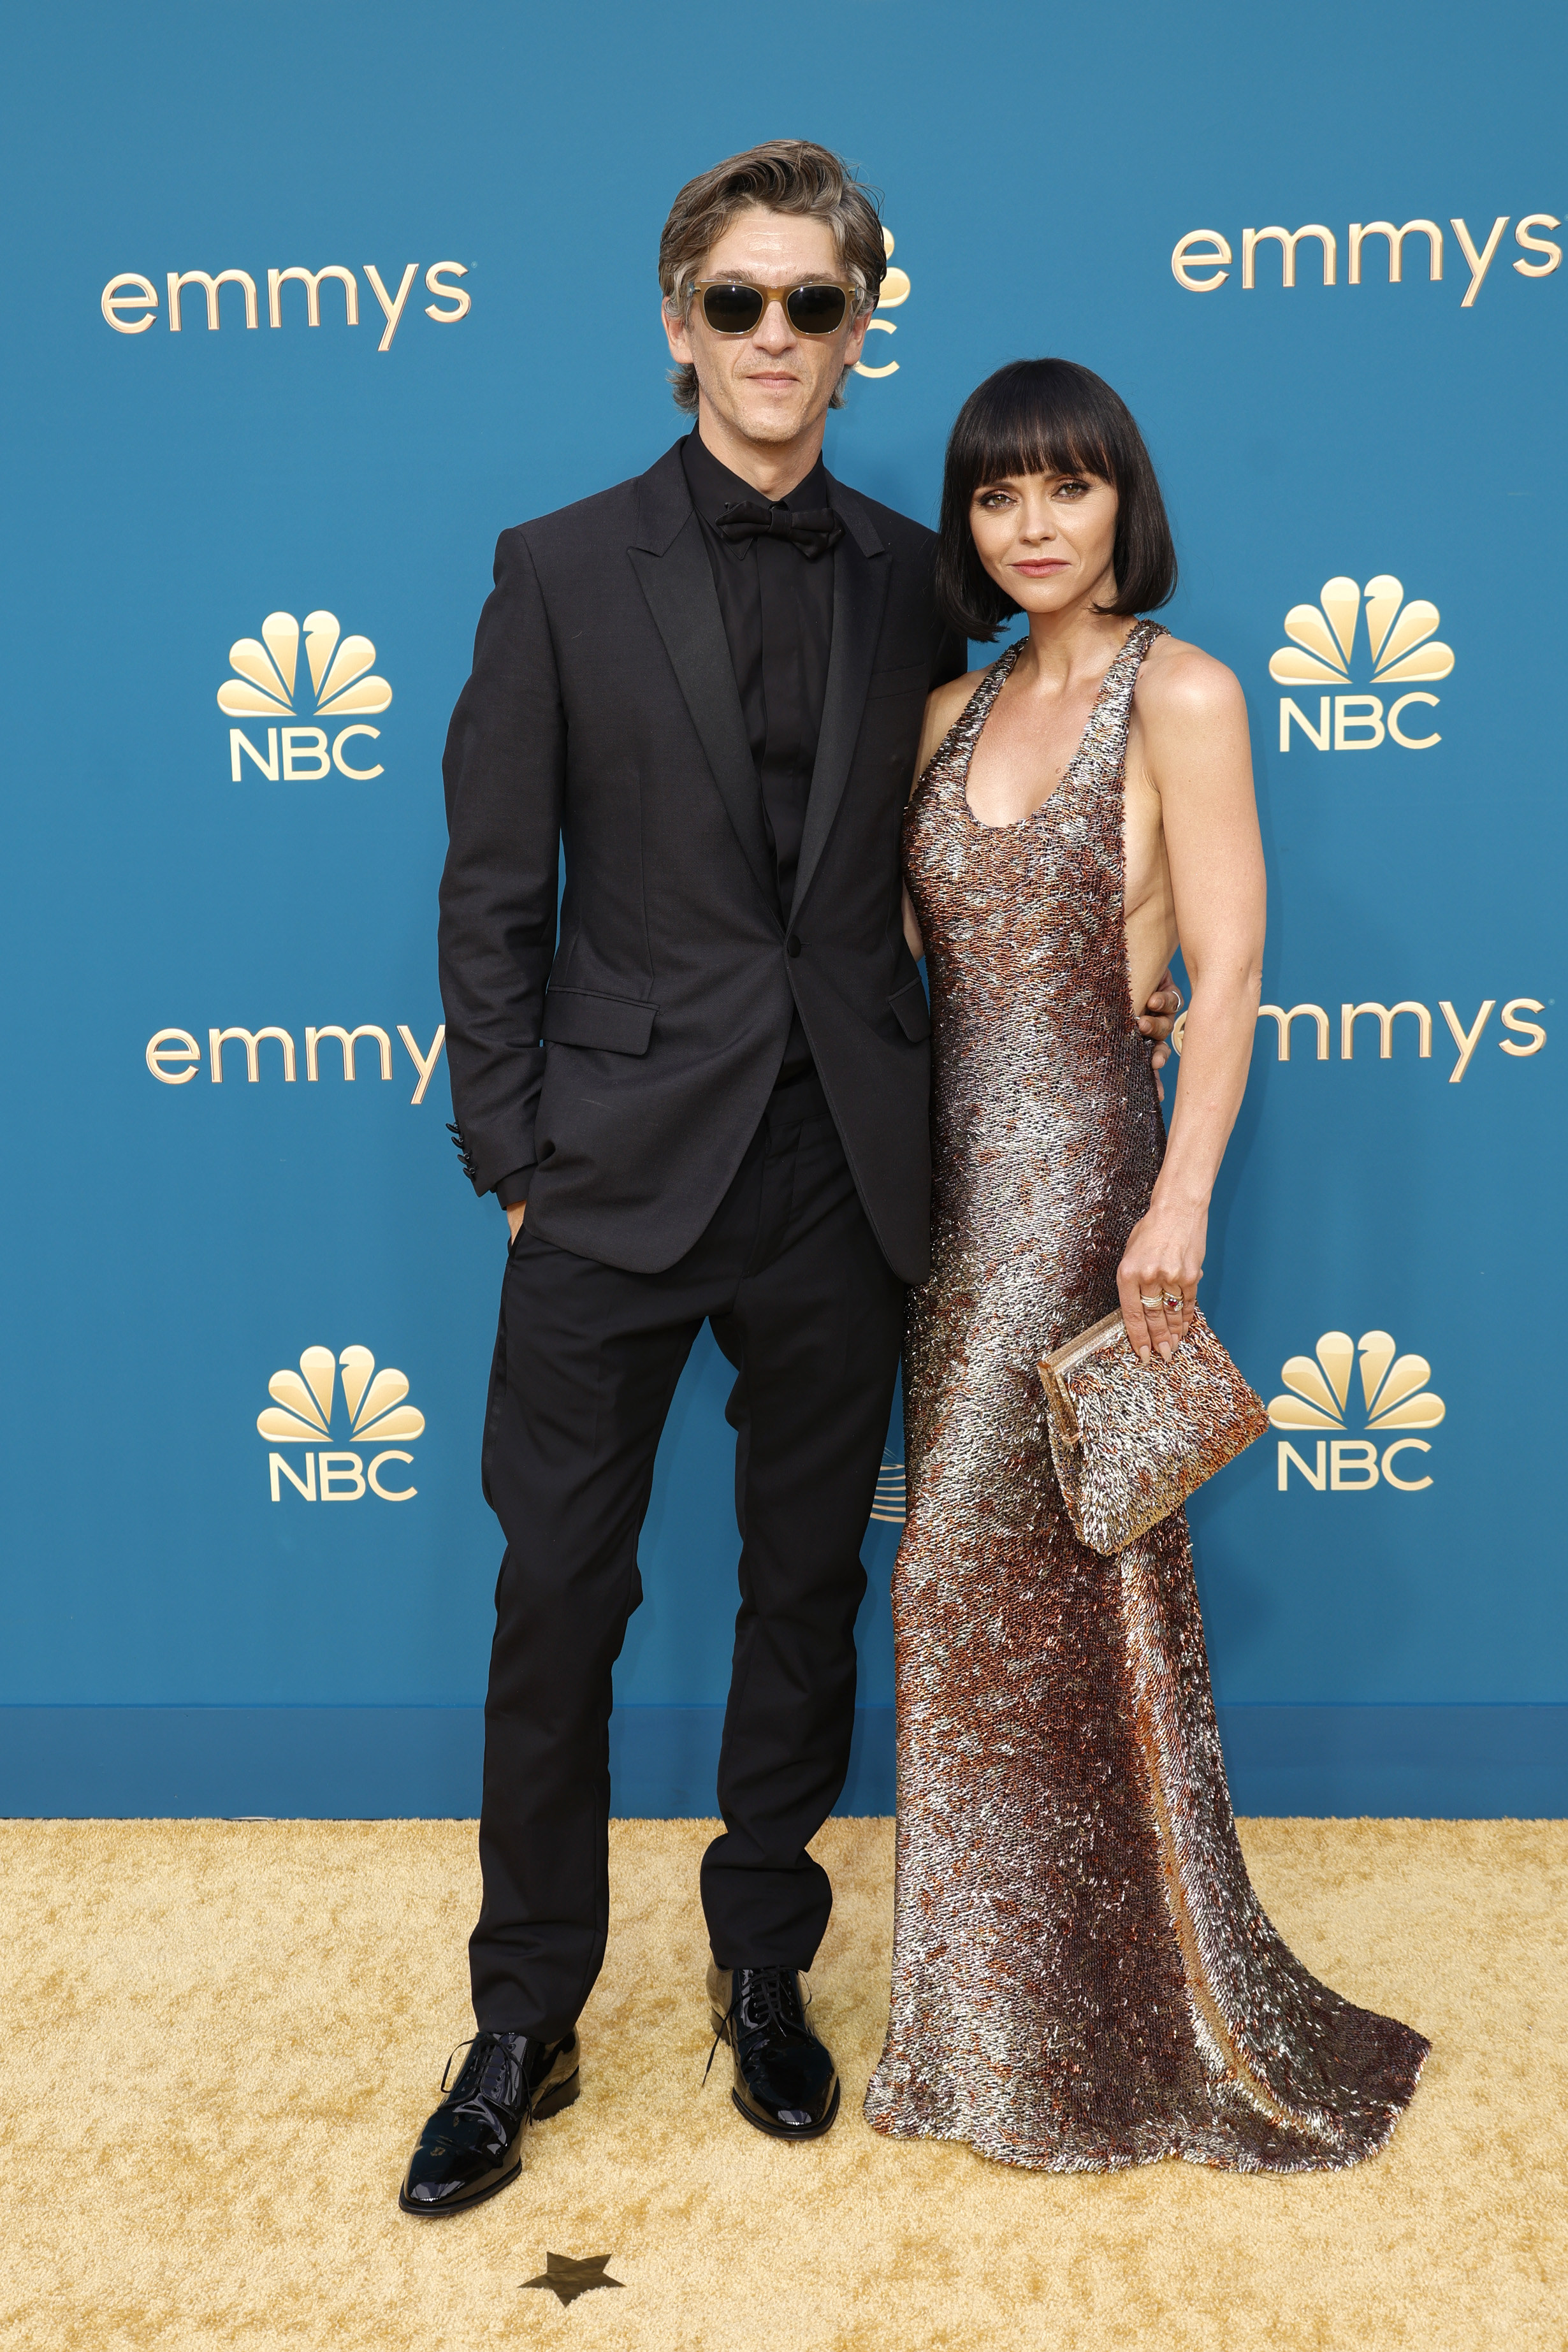 Christina Ricci in a backless sparkly metallic gown and Mark Hampton in a black suit and shirt